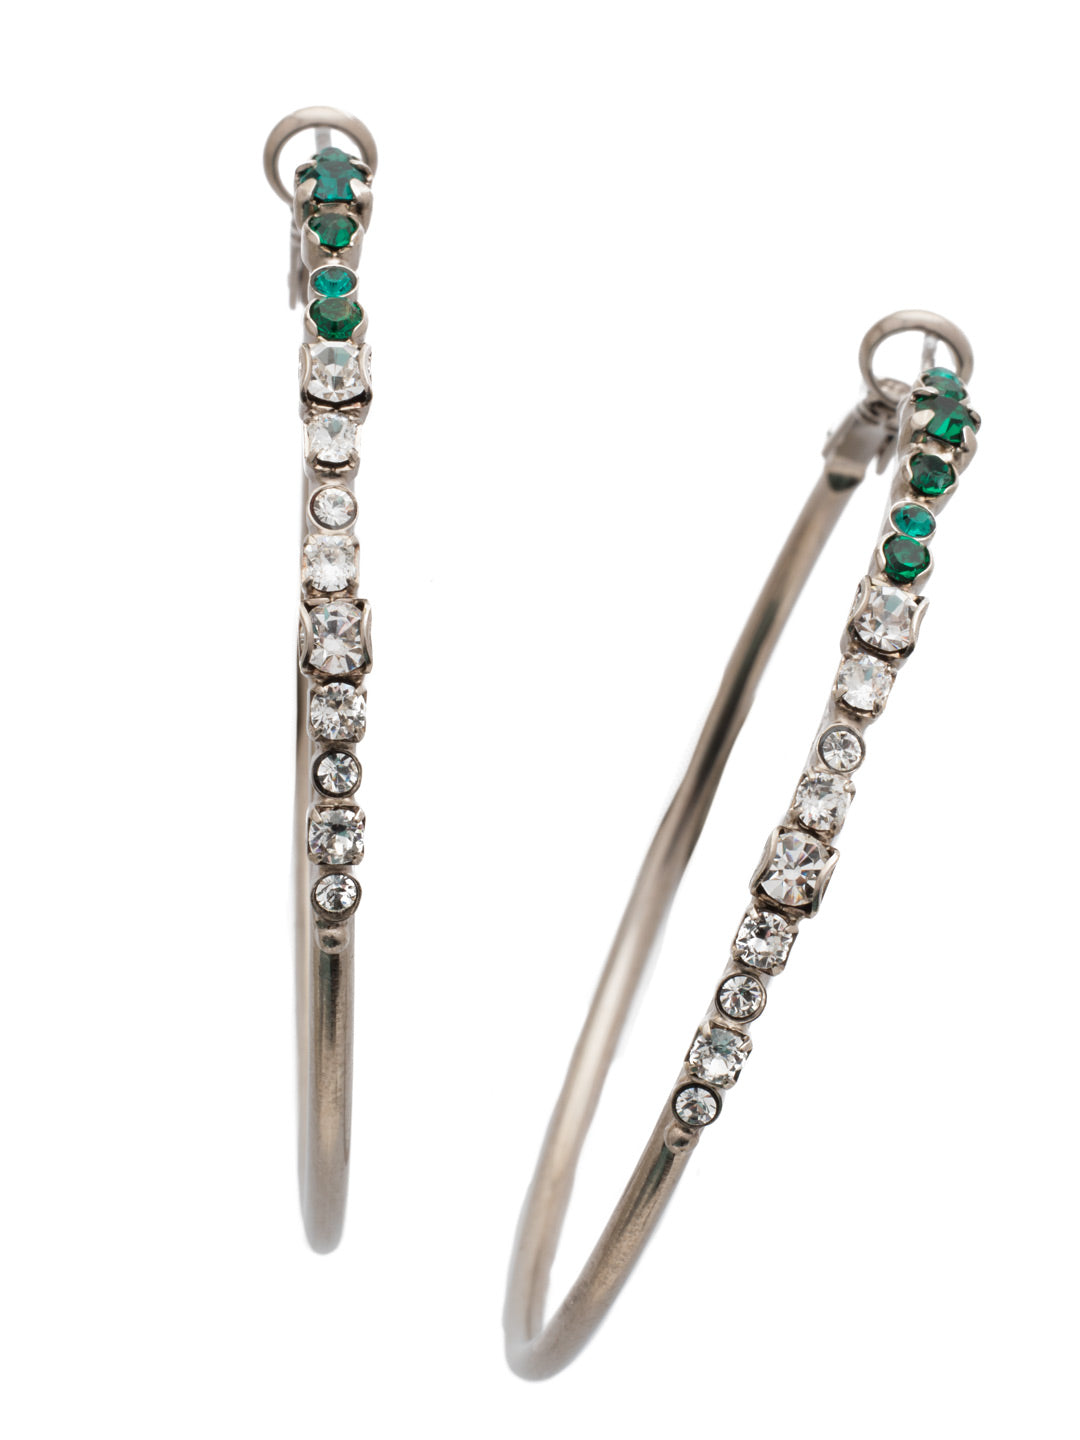 Hoopla Hoop Earrings - EDN79ASSNM - Worth making a fuss over, these crystal hoop earrings make a statement without feeling heavy and that's what the hoopla is about! From Sorrelli's Snowy Moss collection in our Antique Silver-tone finish.